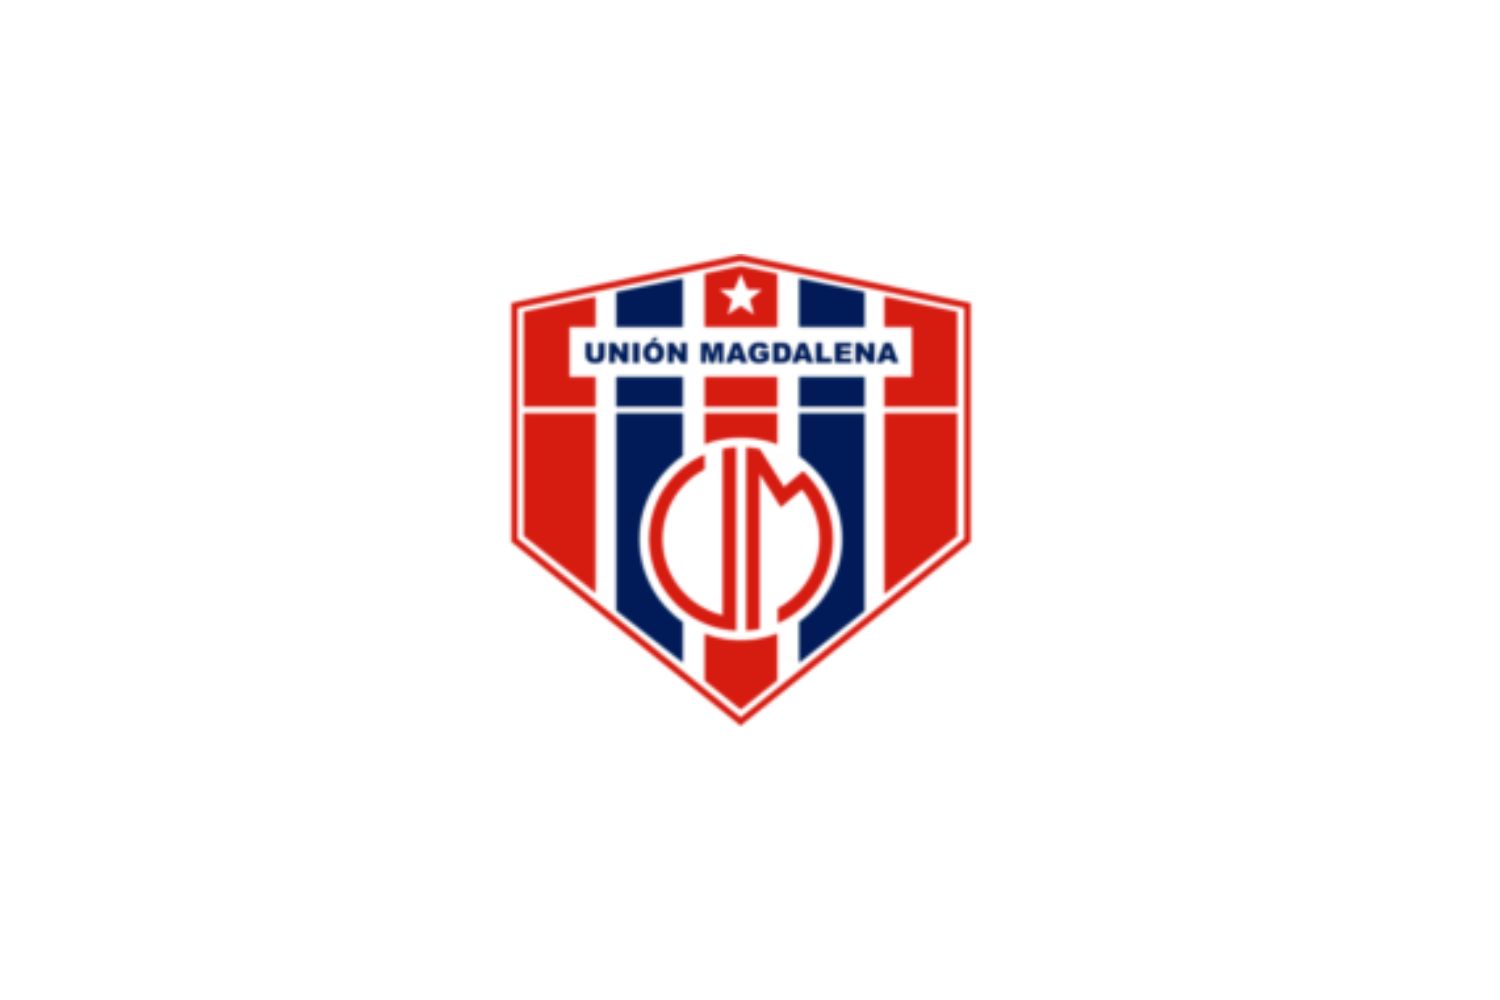 union-magdalena-17-football-club-facts